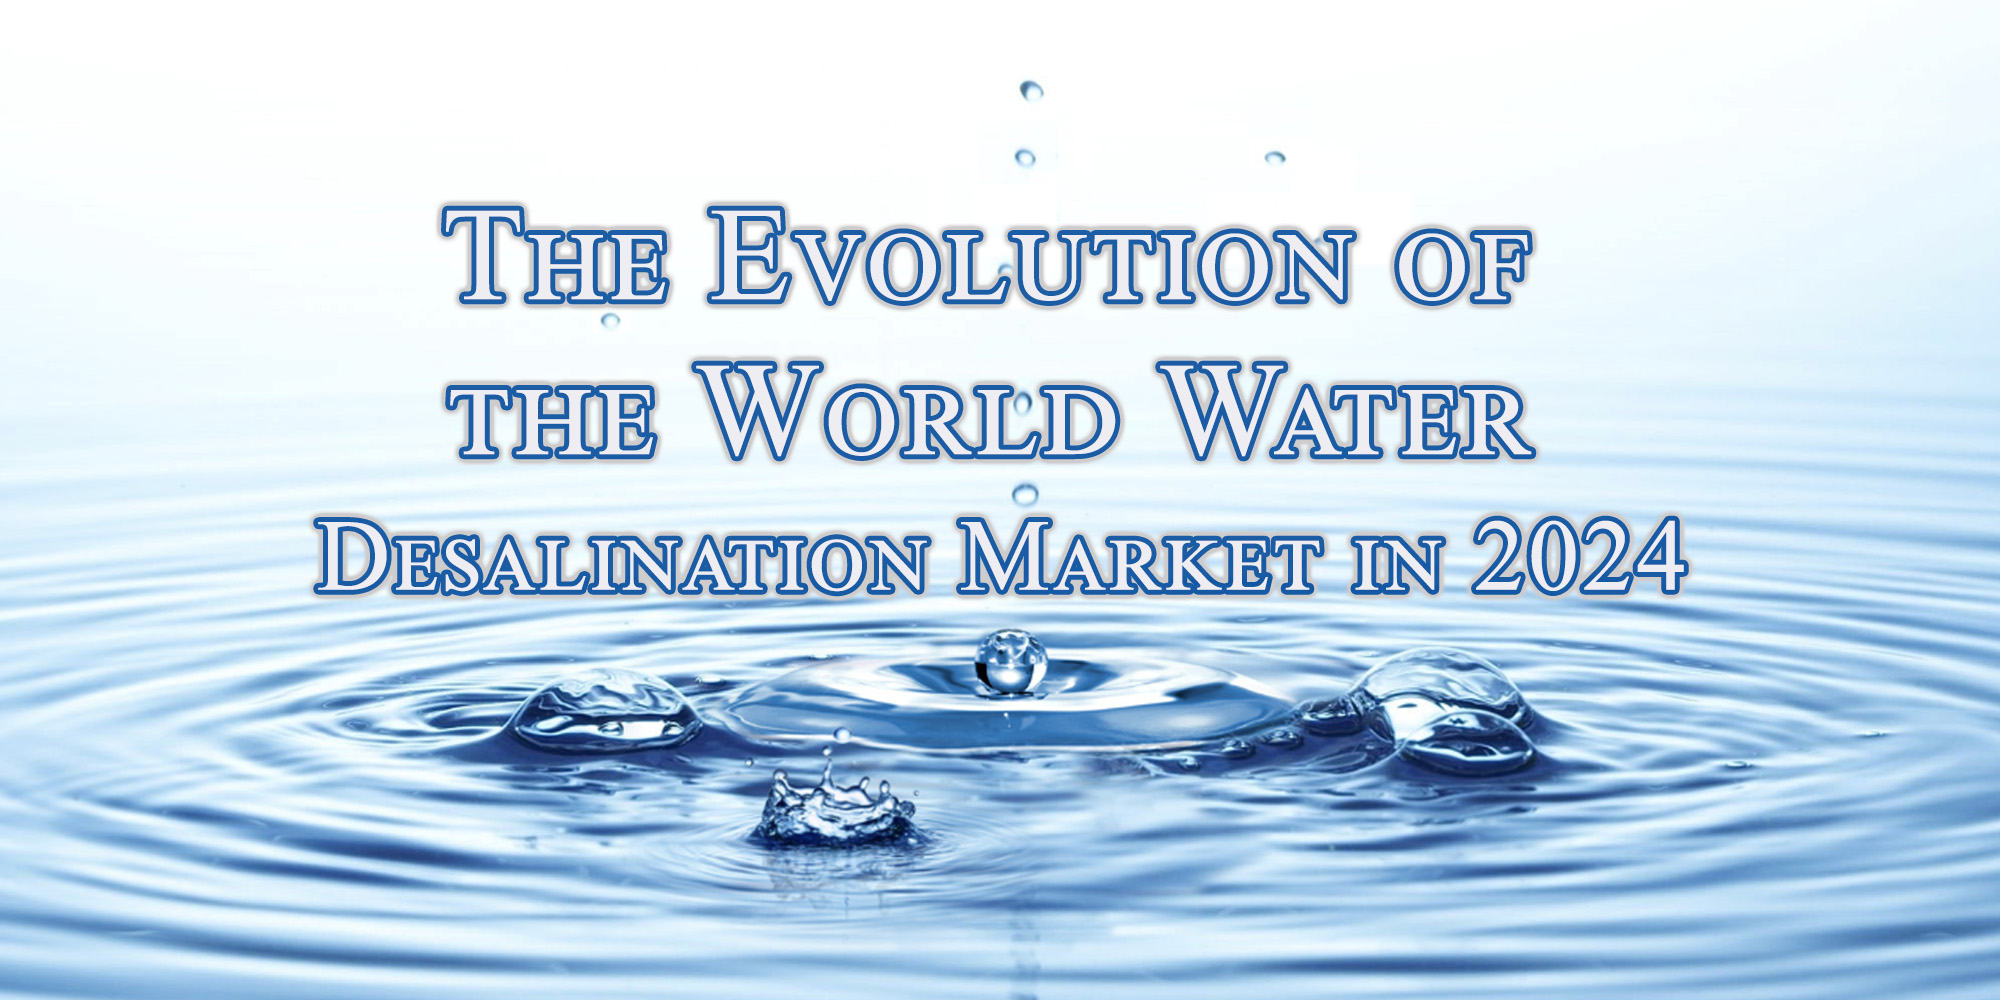 The Evolution of the World Water Desalination Market in 2024